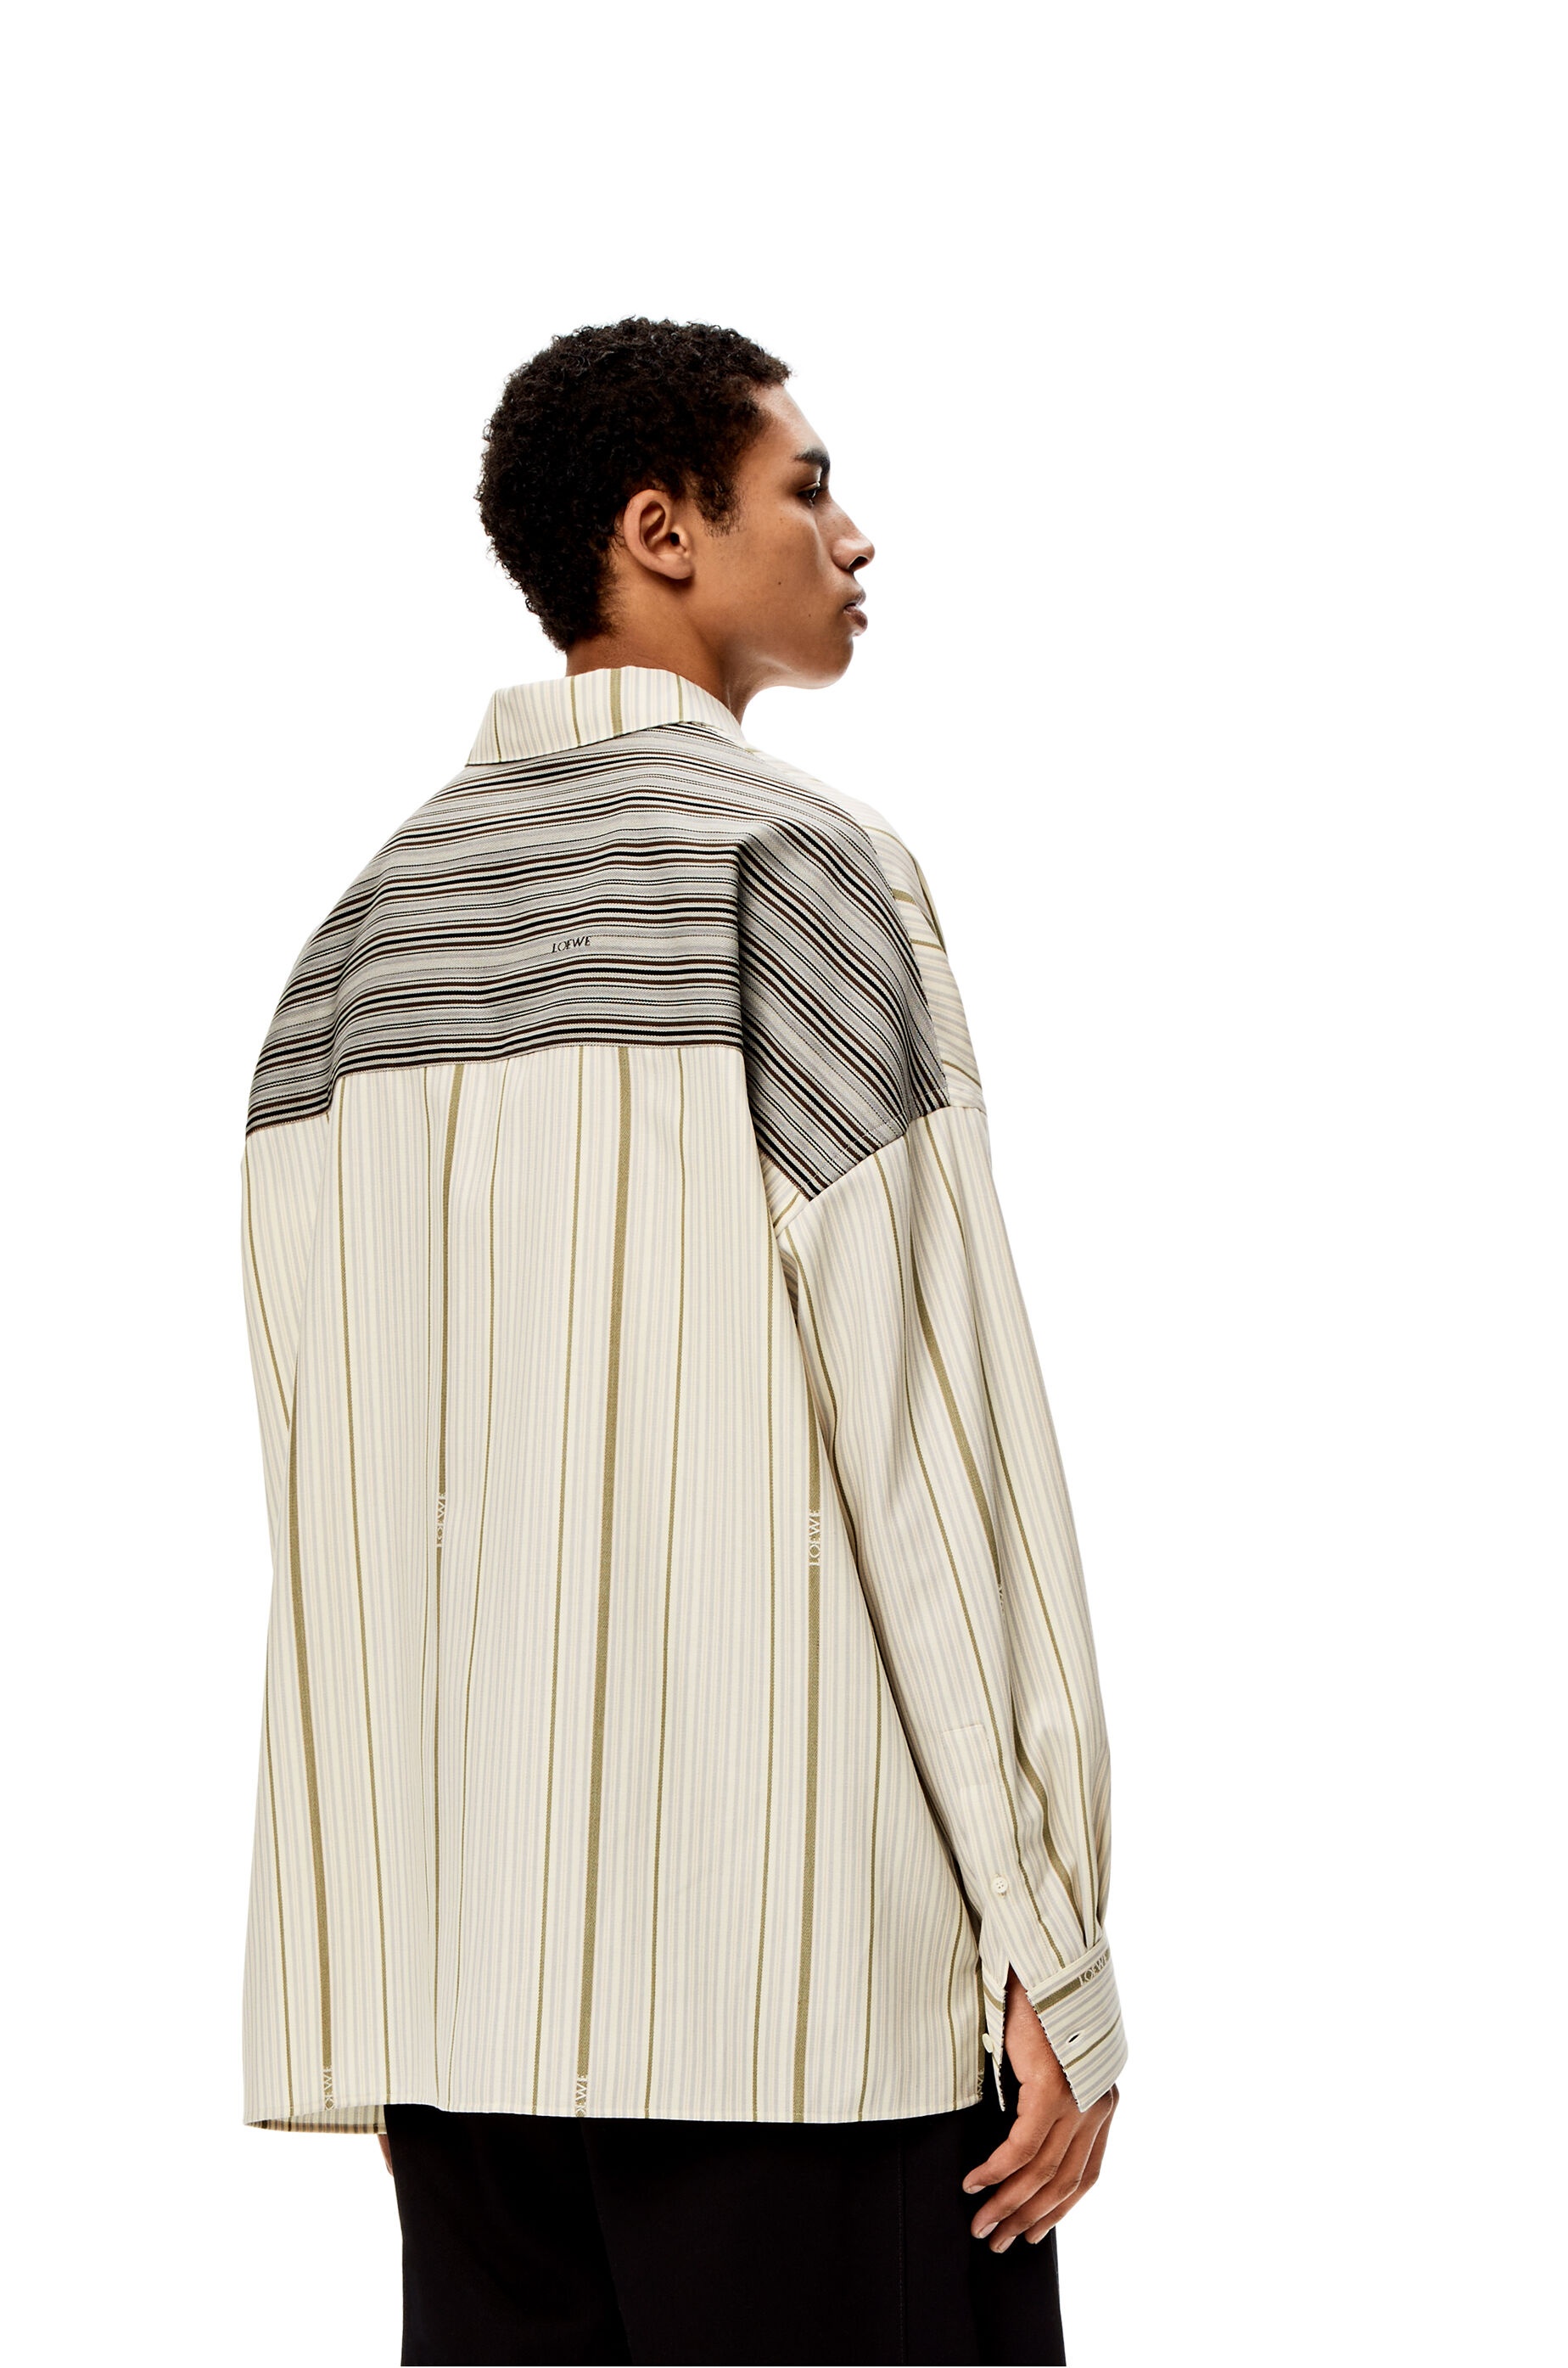 Jacquard stripe shirt in wool and cotton - 4